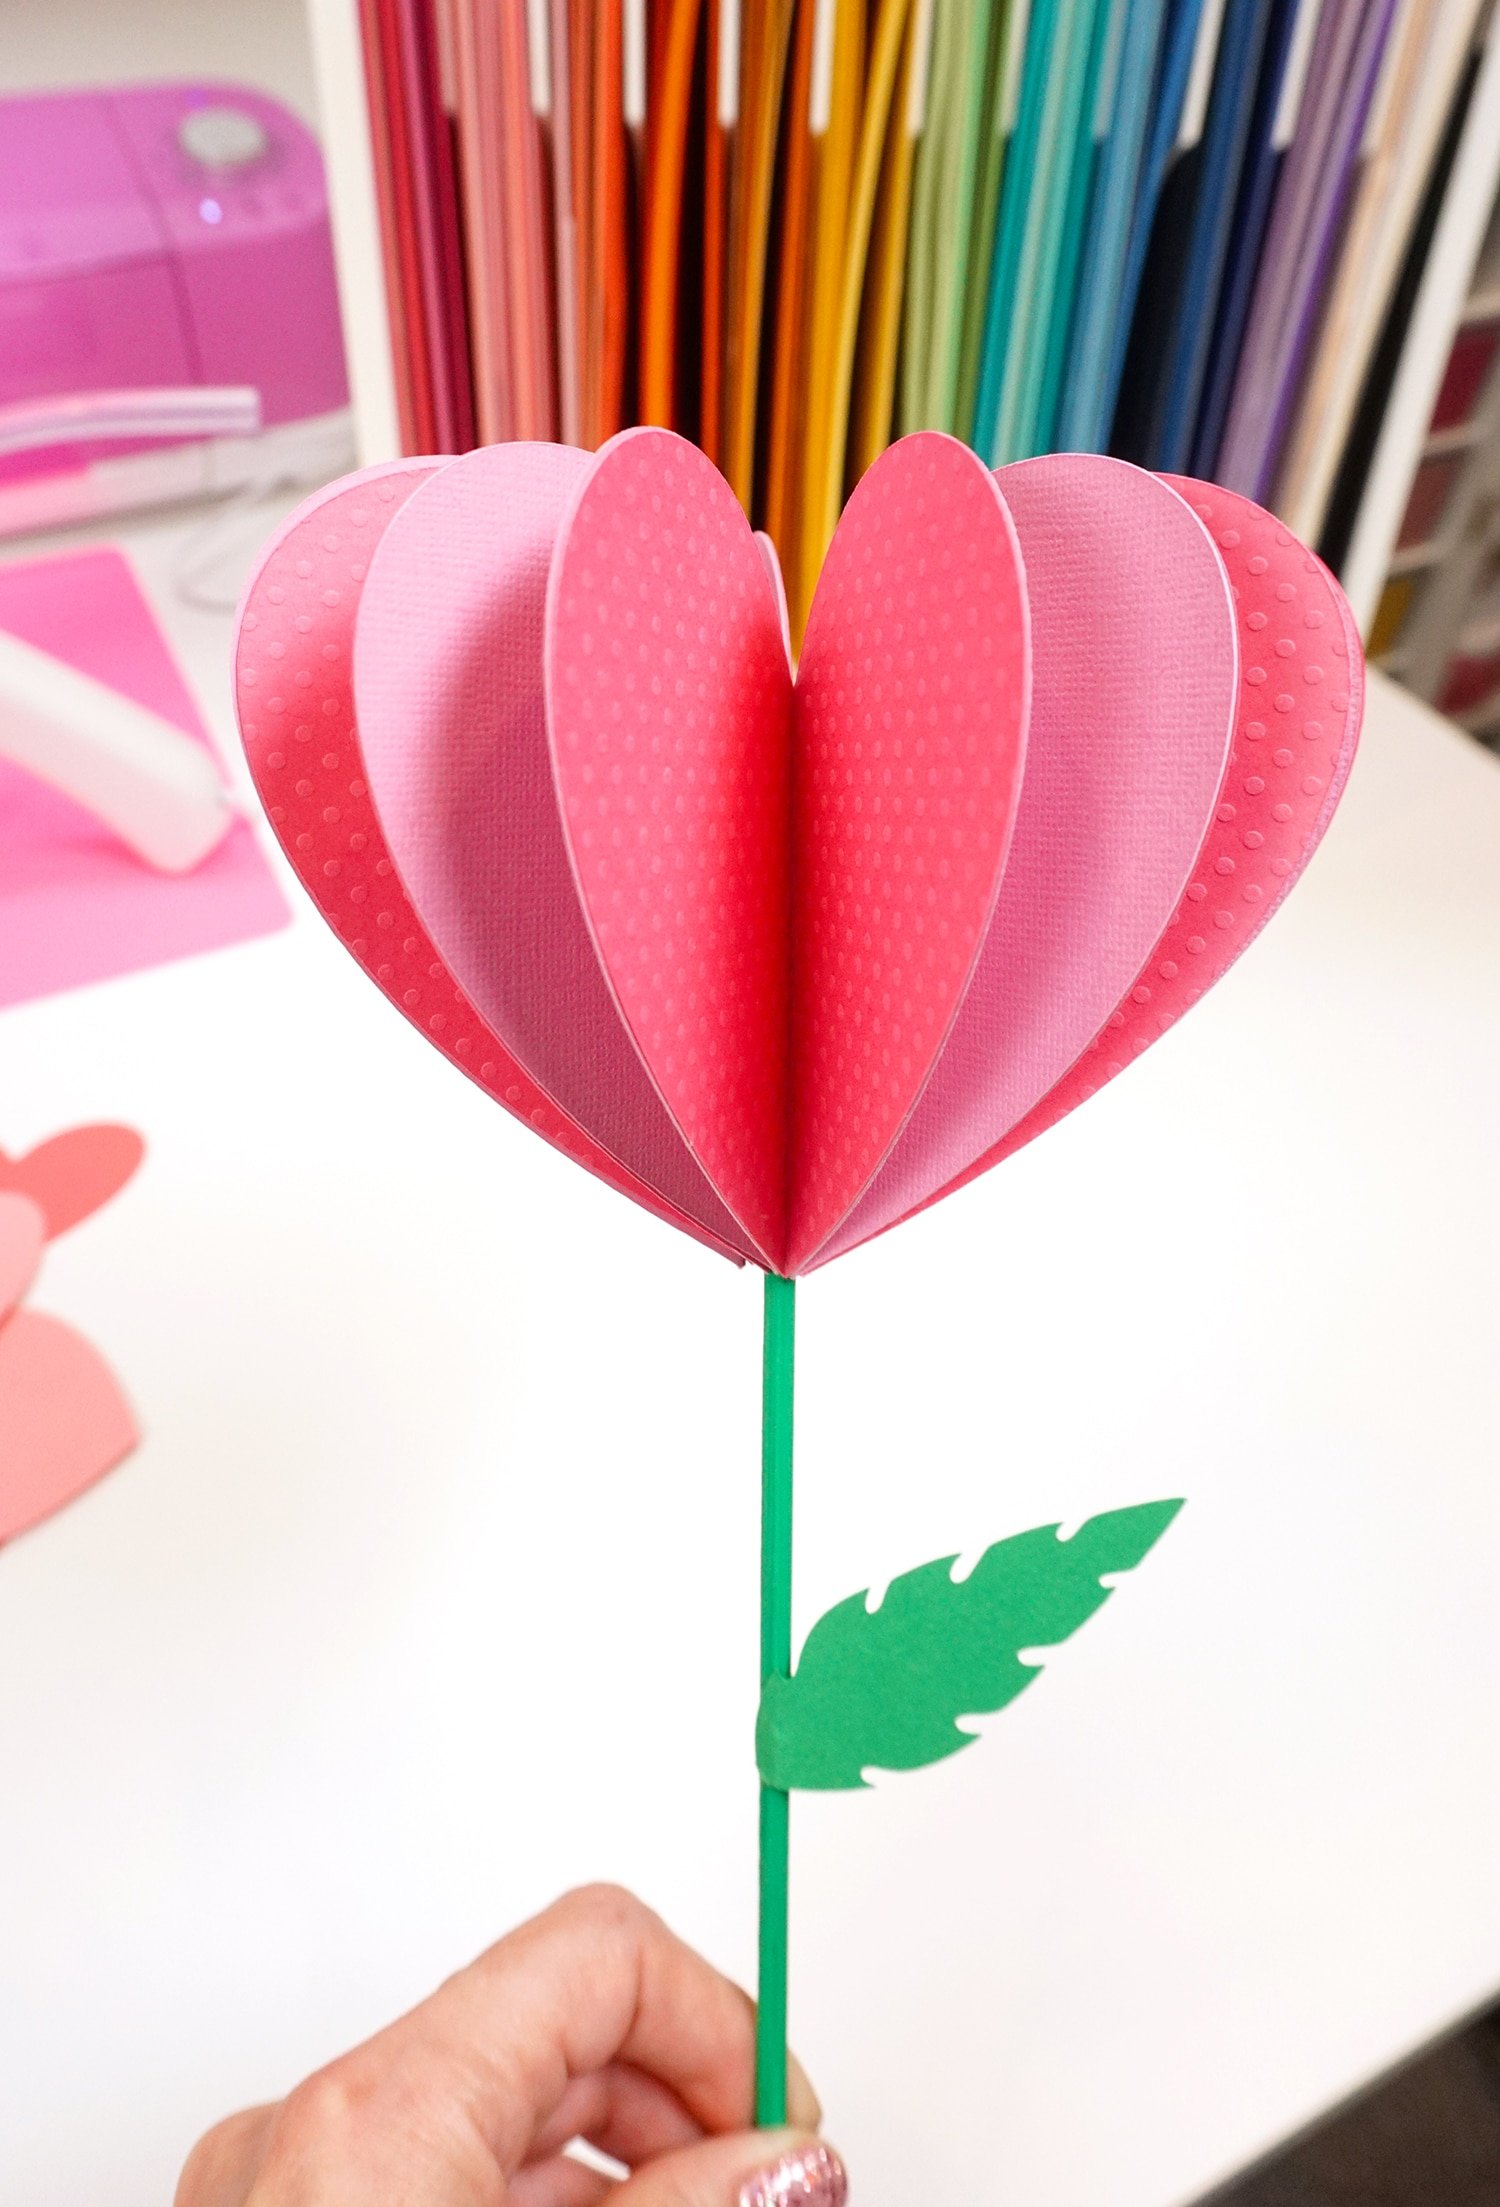 constructed paper heart flower finished